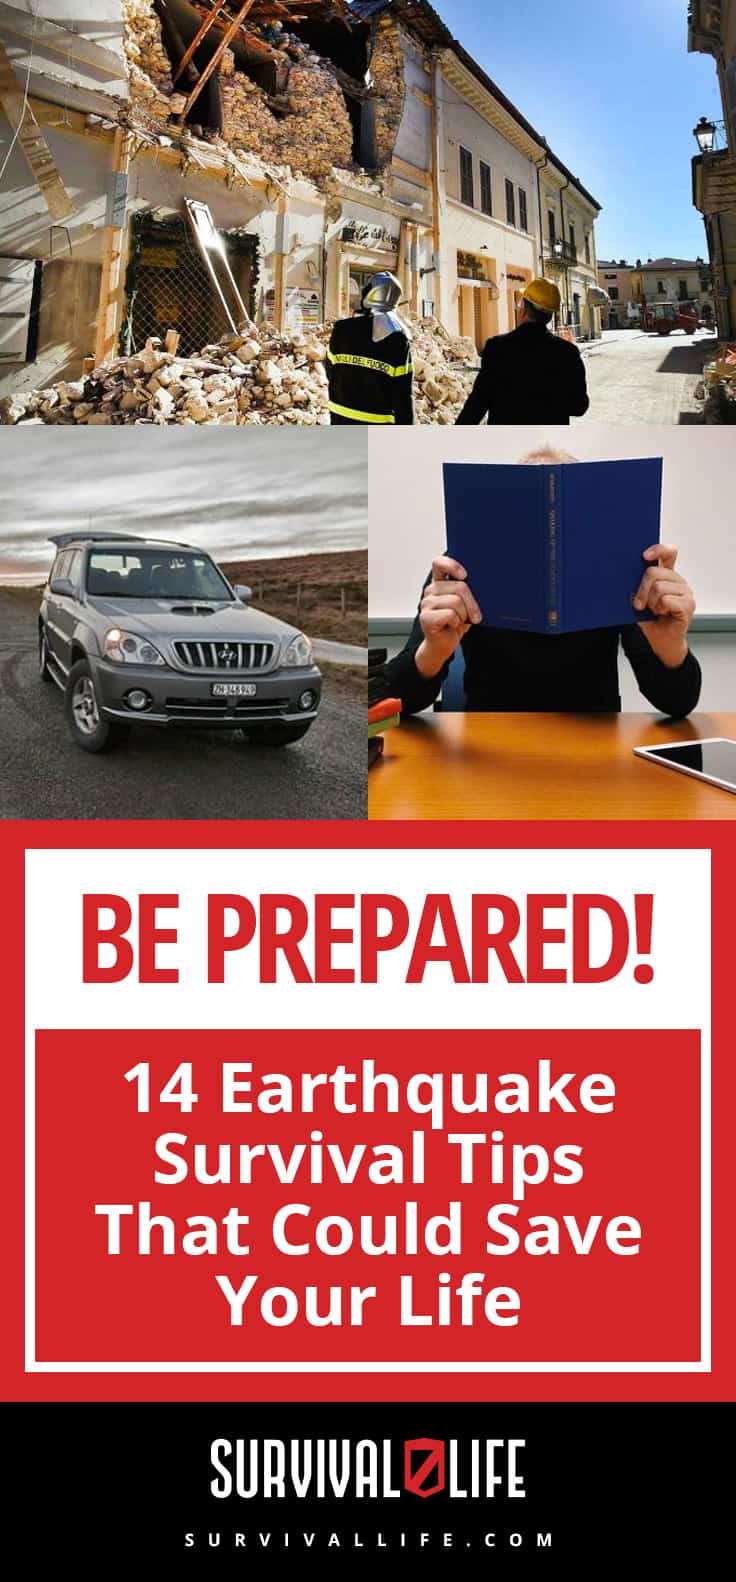 Be Prepared! 14 Earthquake Survival Tips That Could Save Your Life